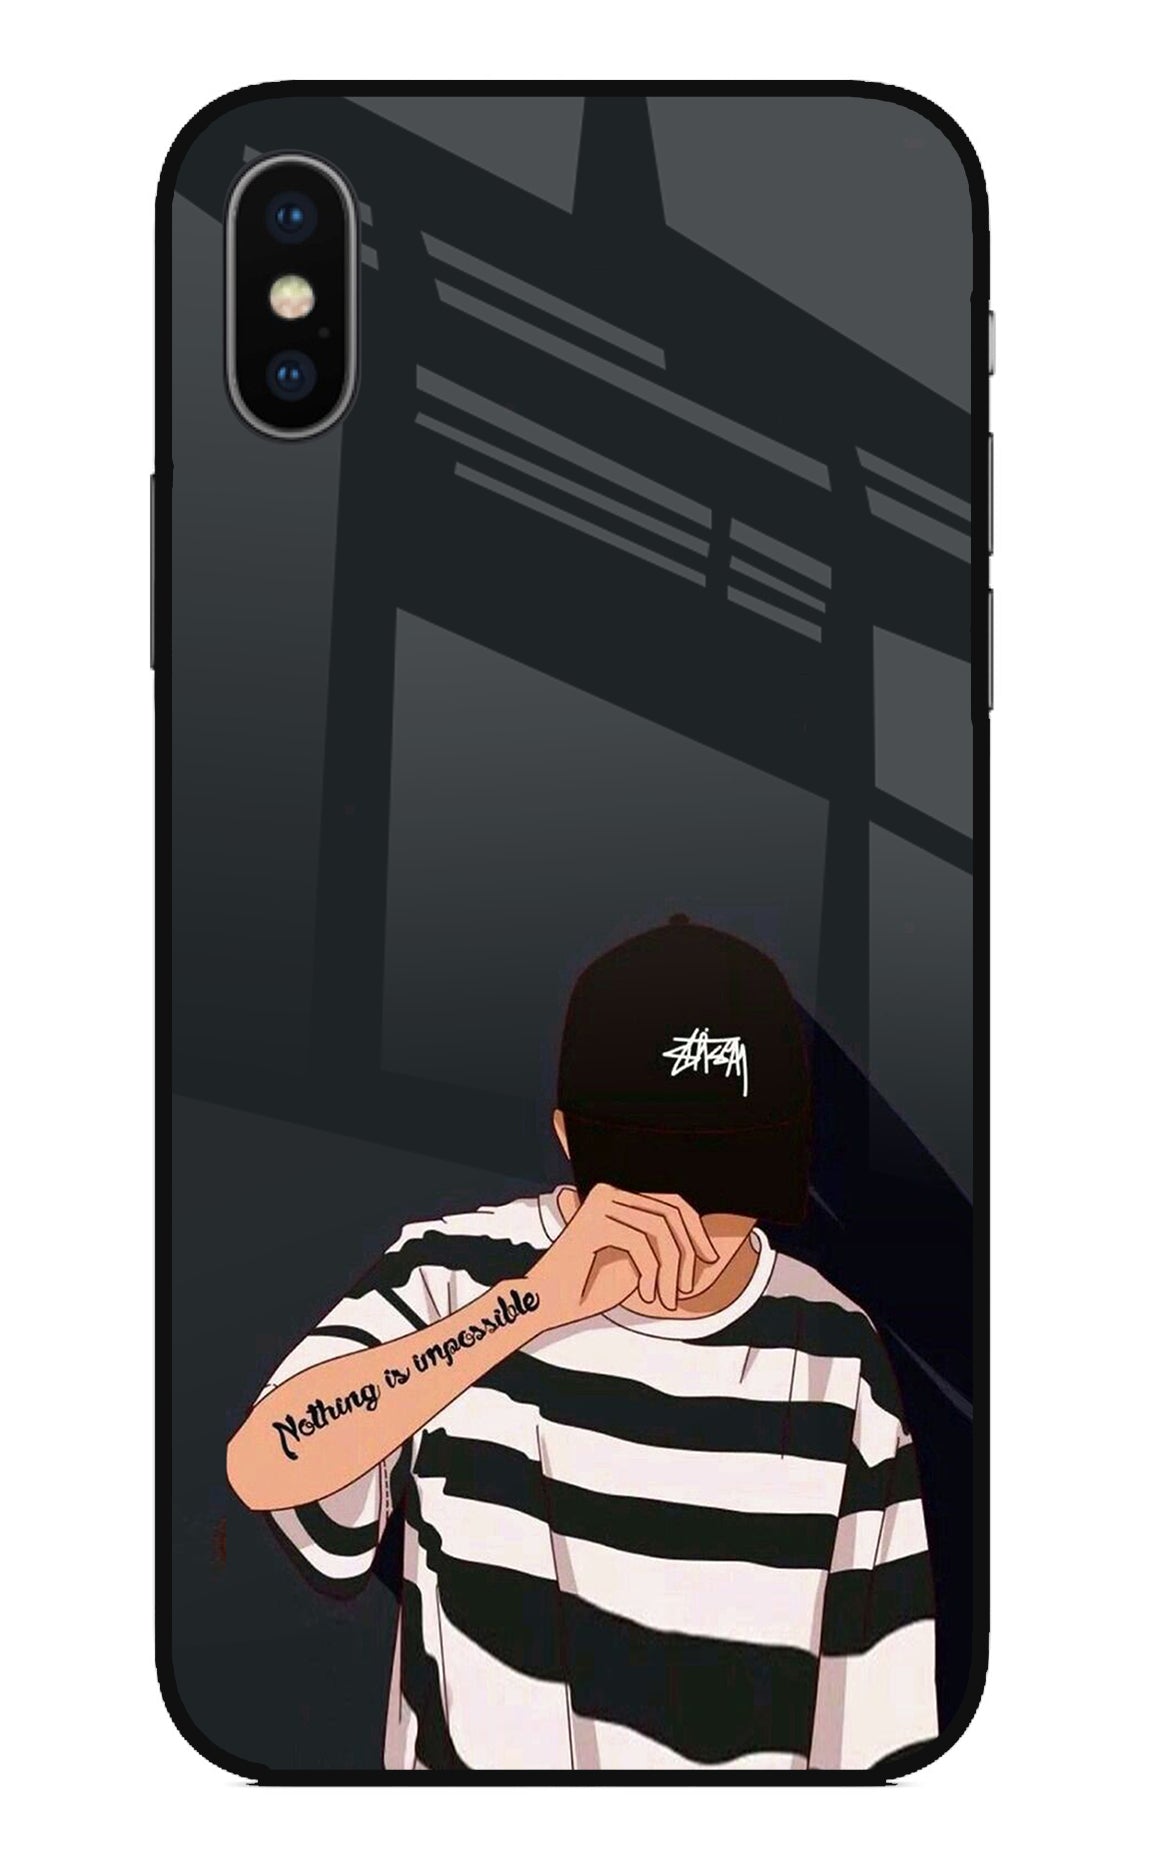 Aesthetic Boy iPhone X Back Cover